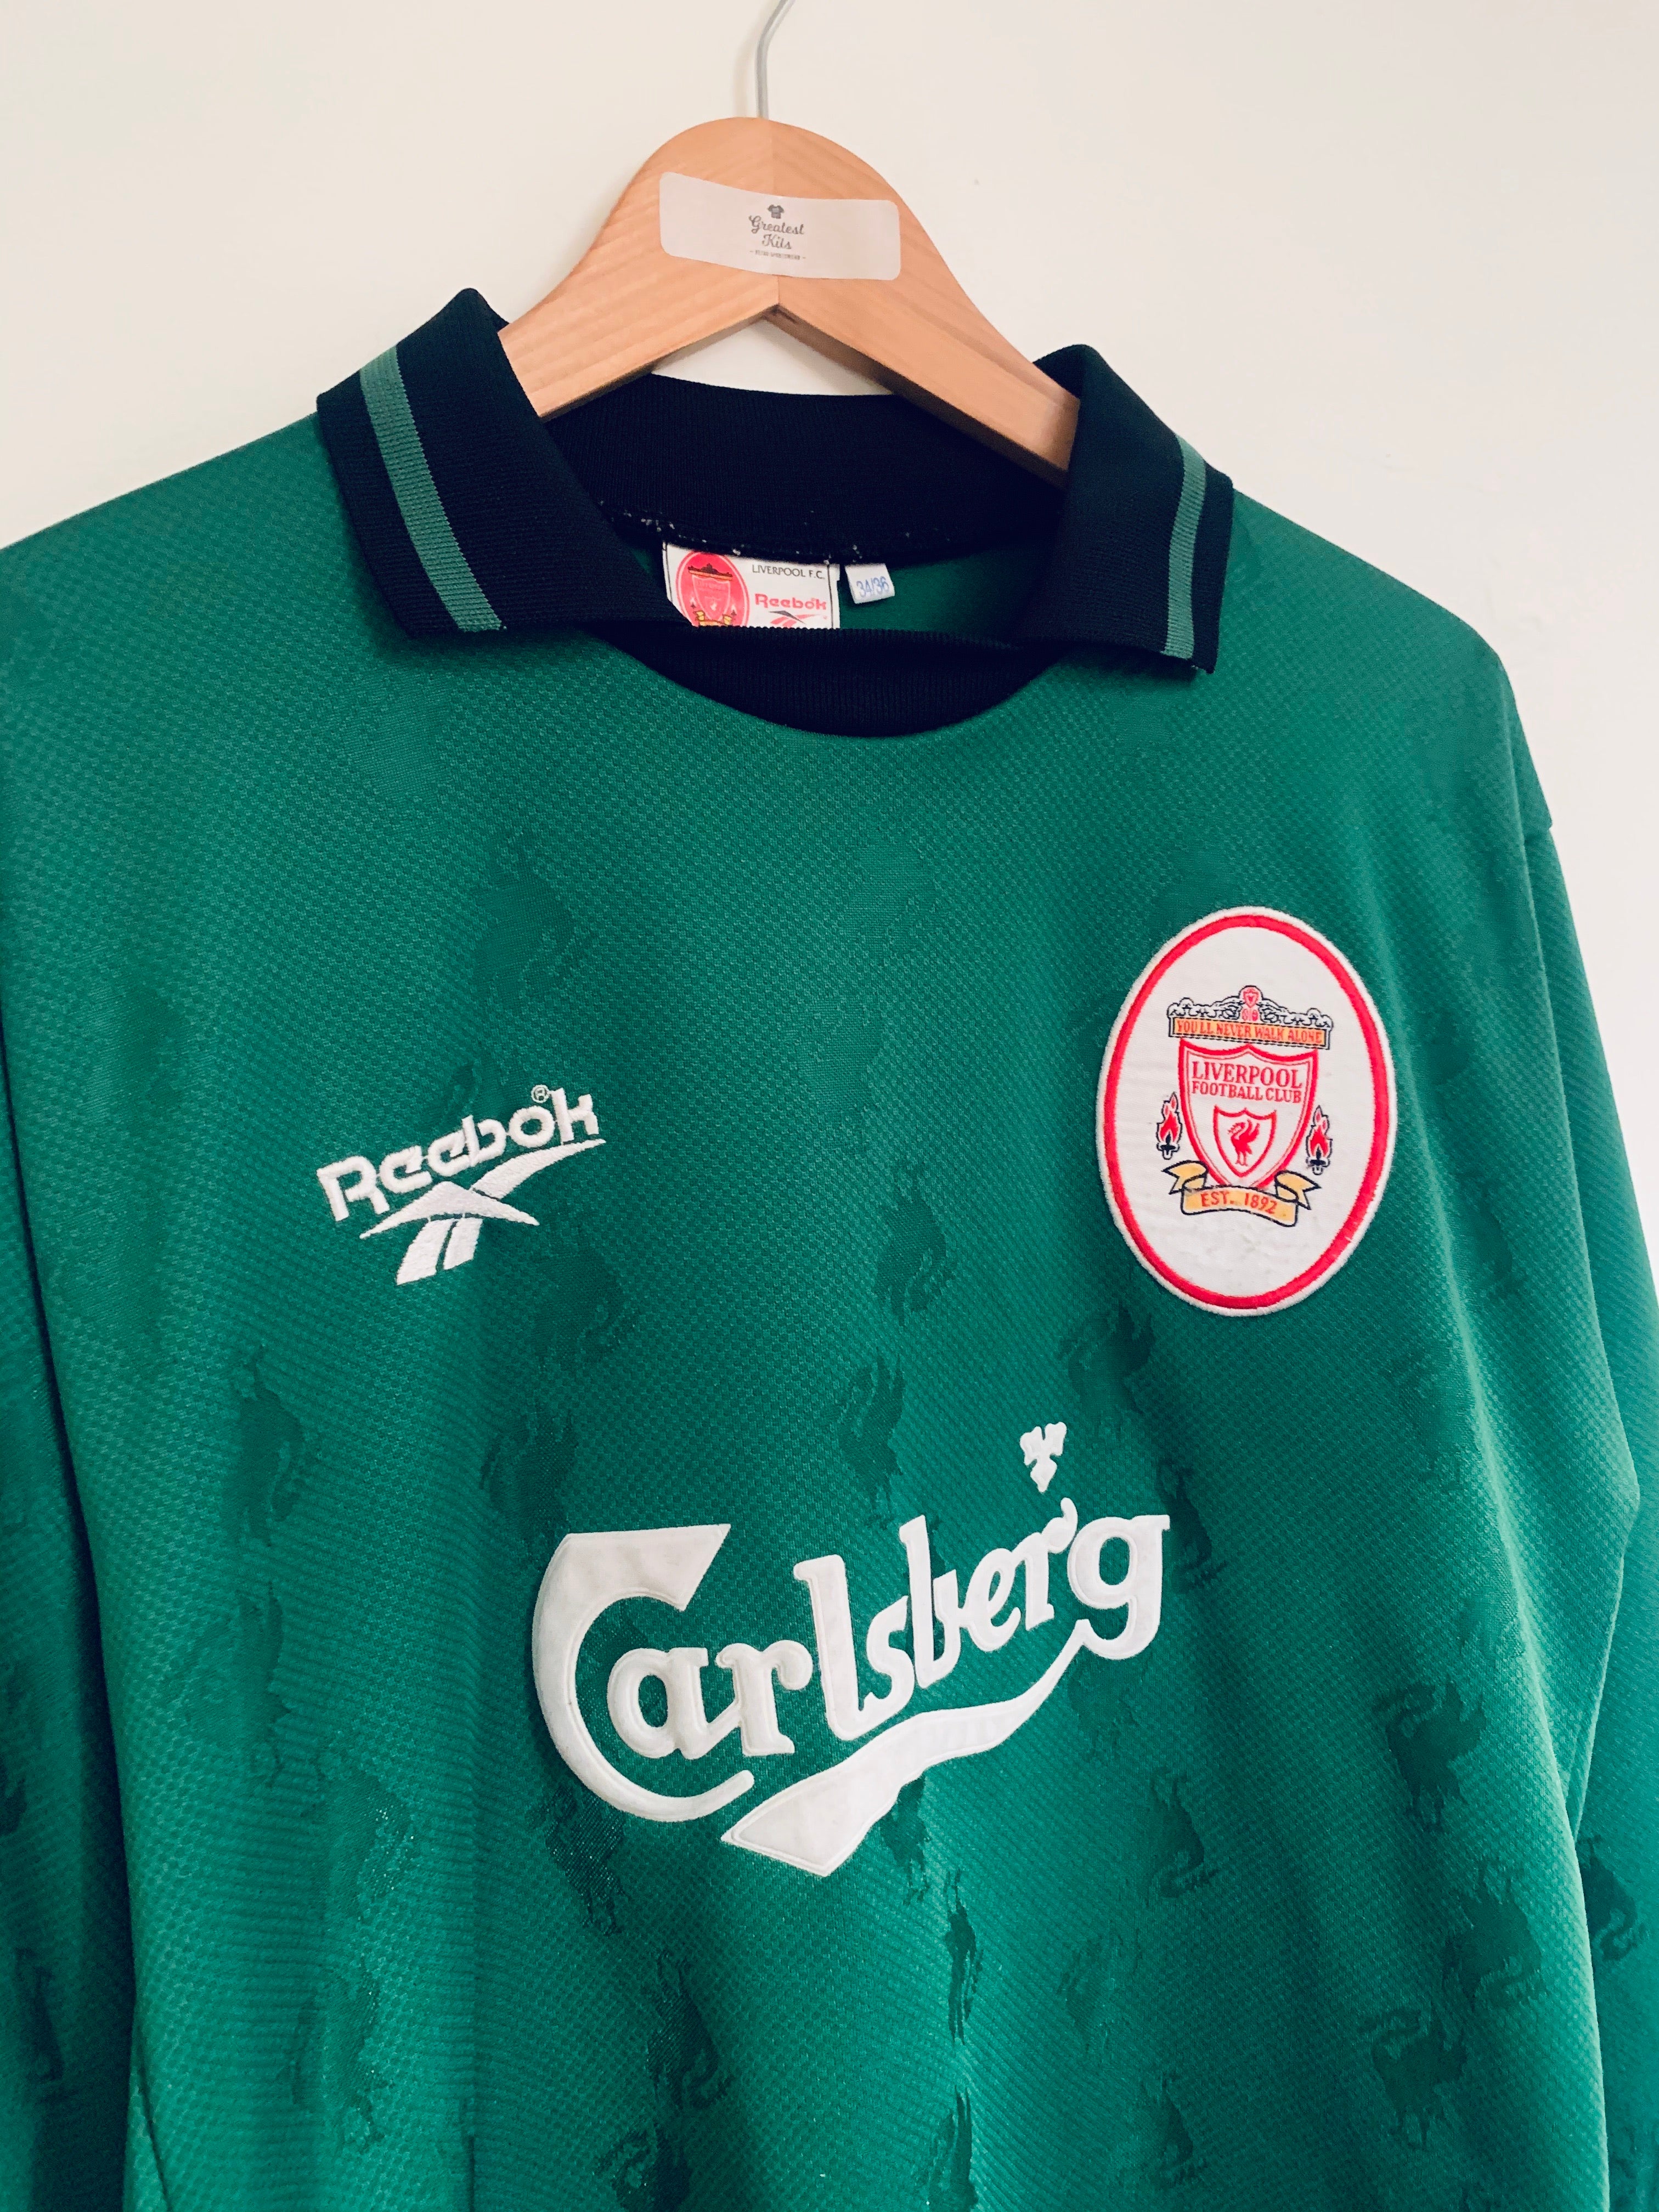 Maillot Liverpool GK 1996/97 (S) 9/10